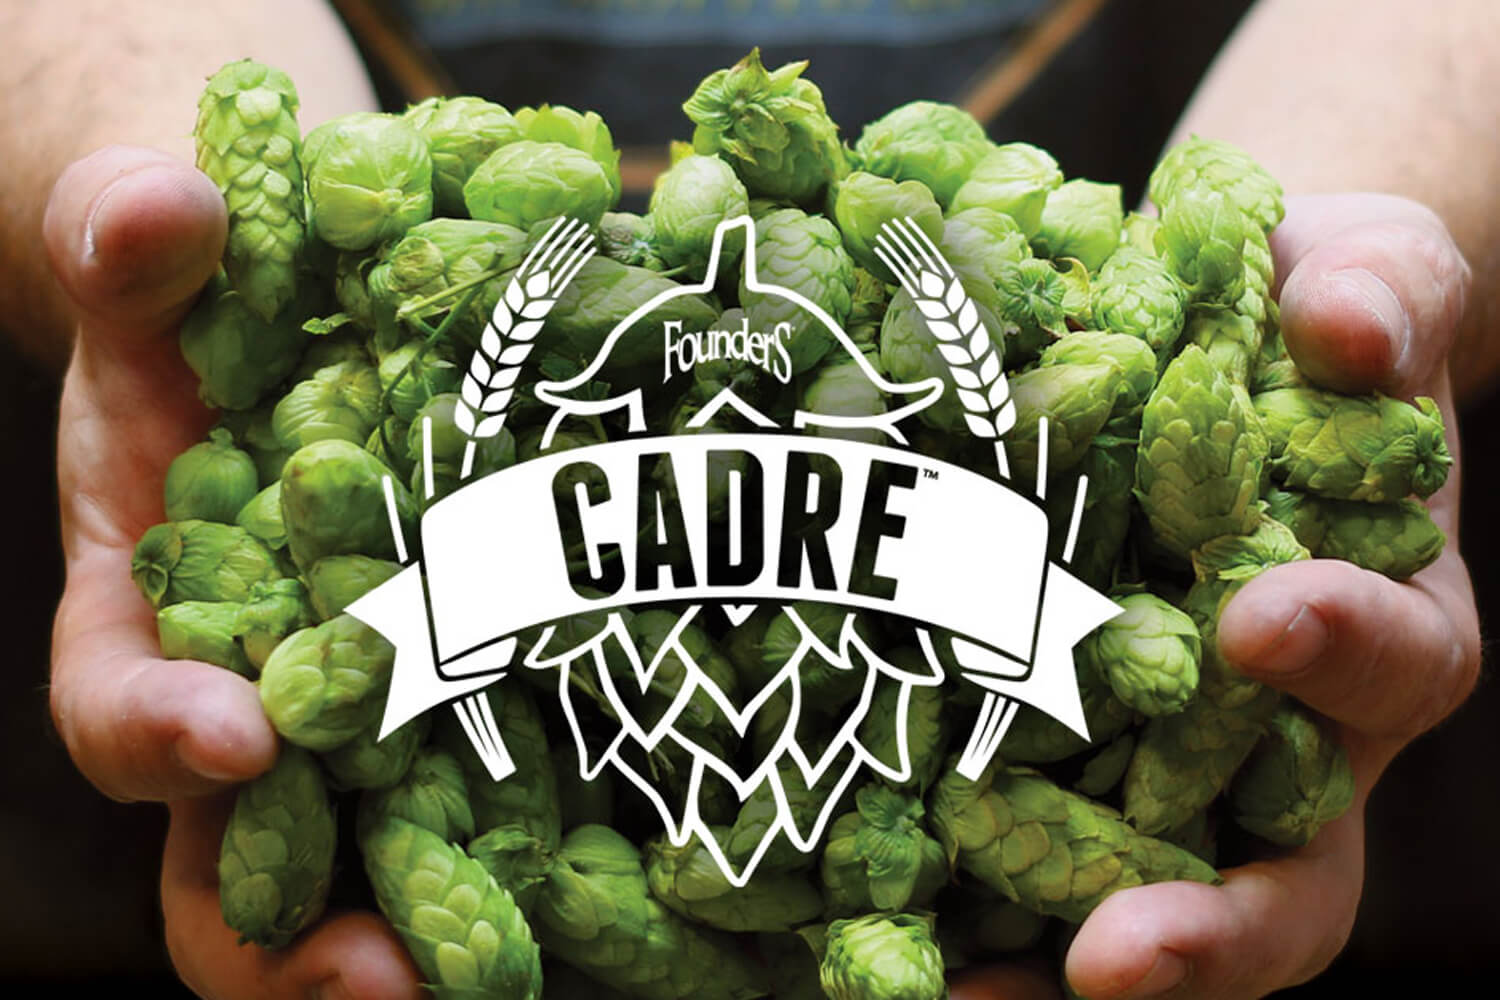 Hands holding hops with white Cadre logo overlay